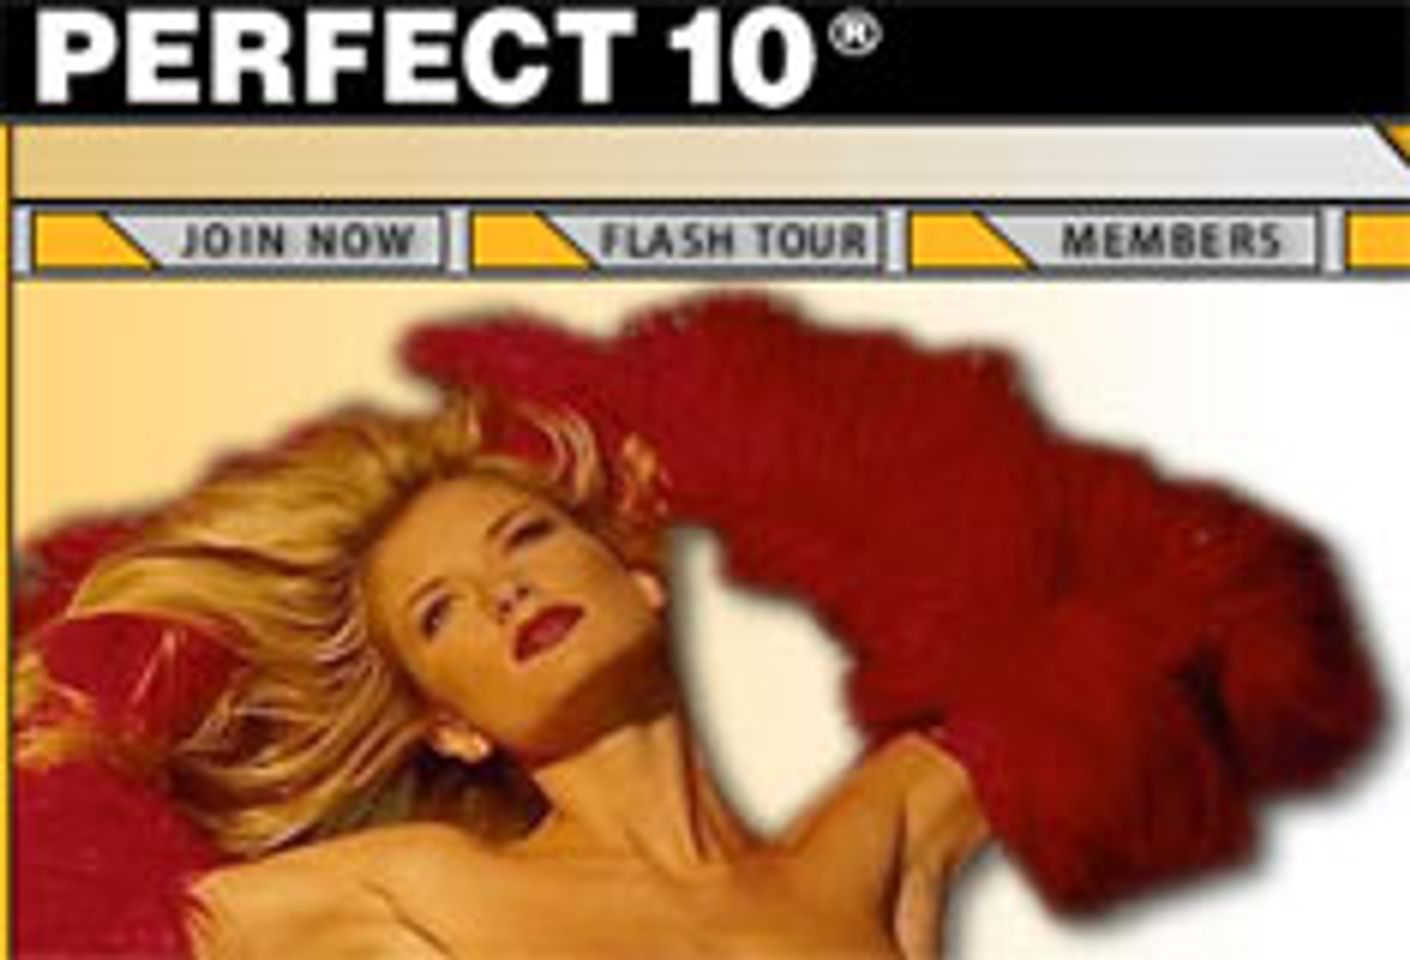 <I>Perfect 10</I> Sues Google For Contributory Infringement